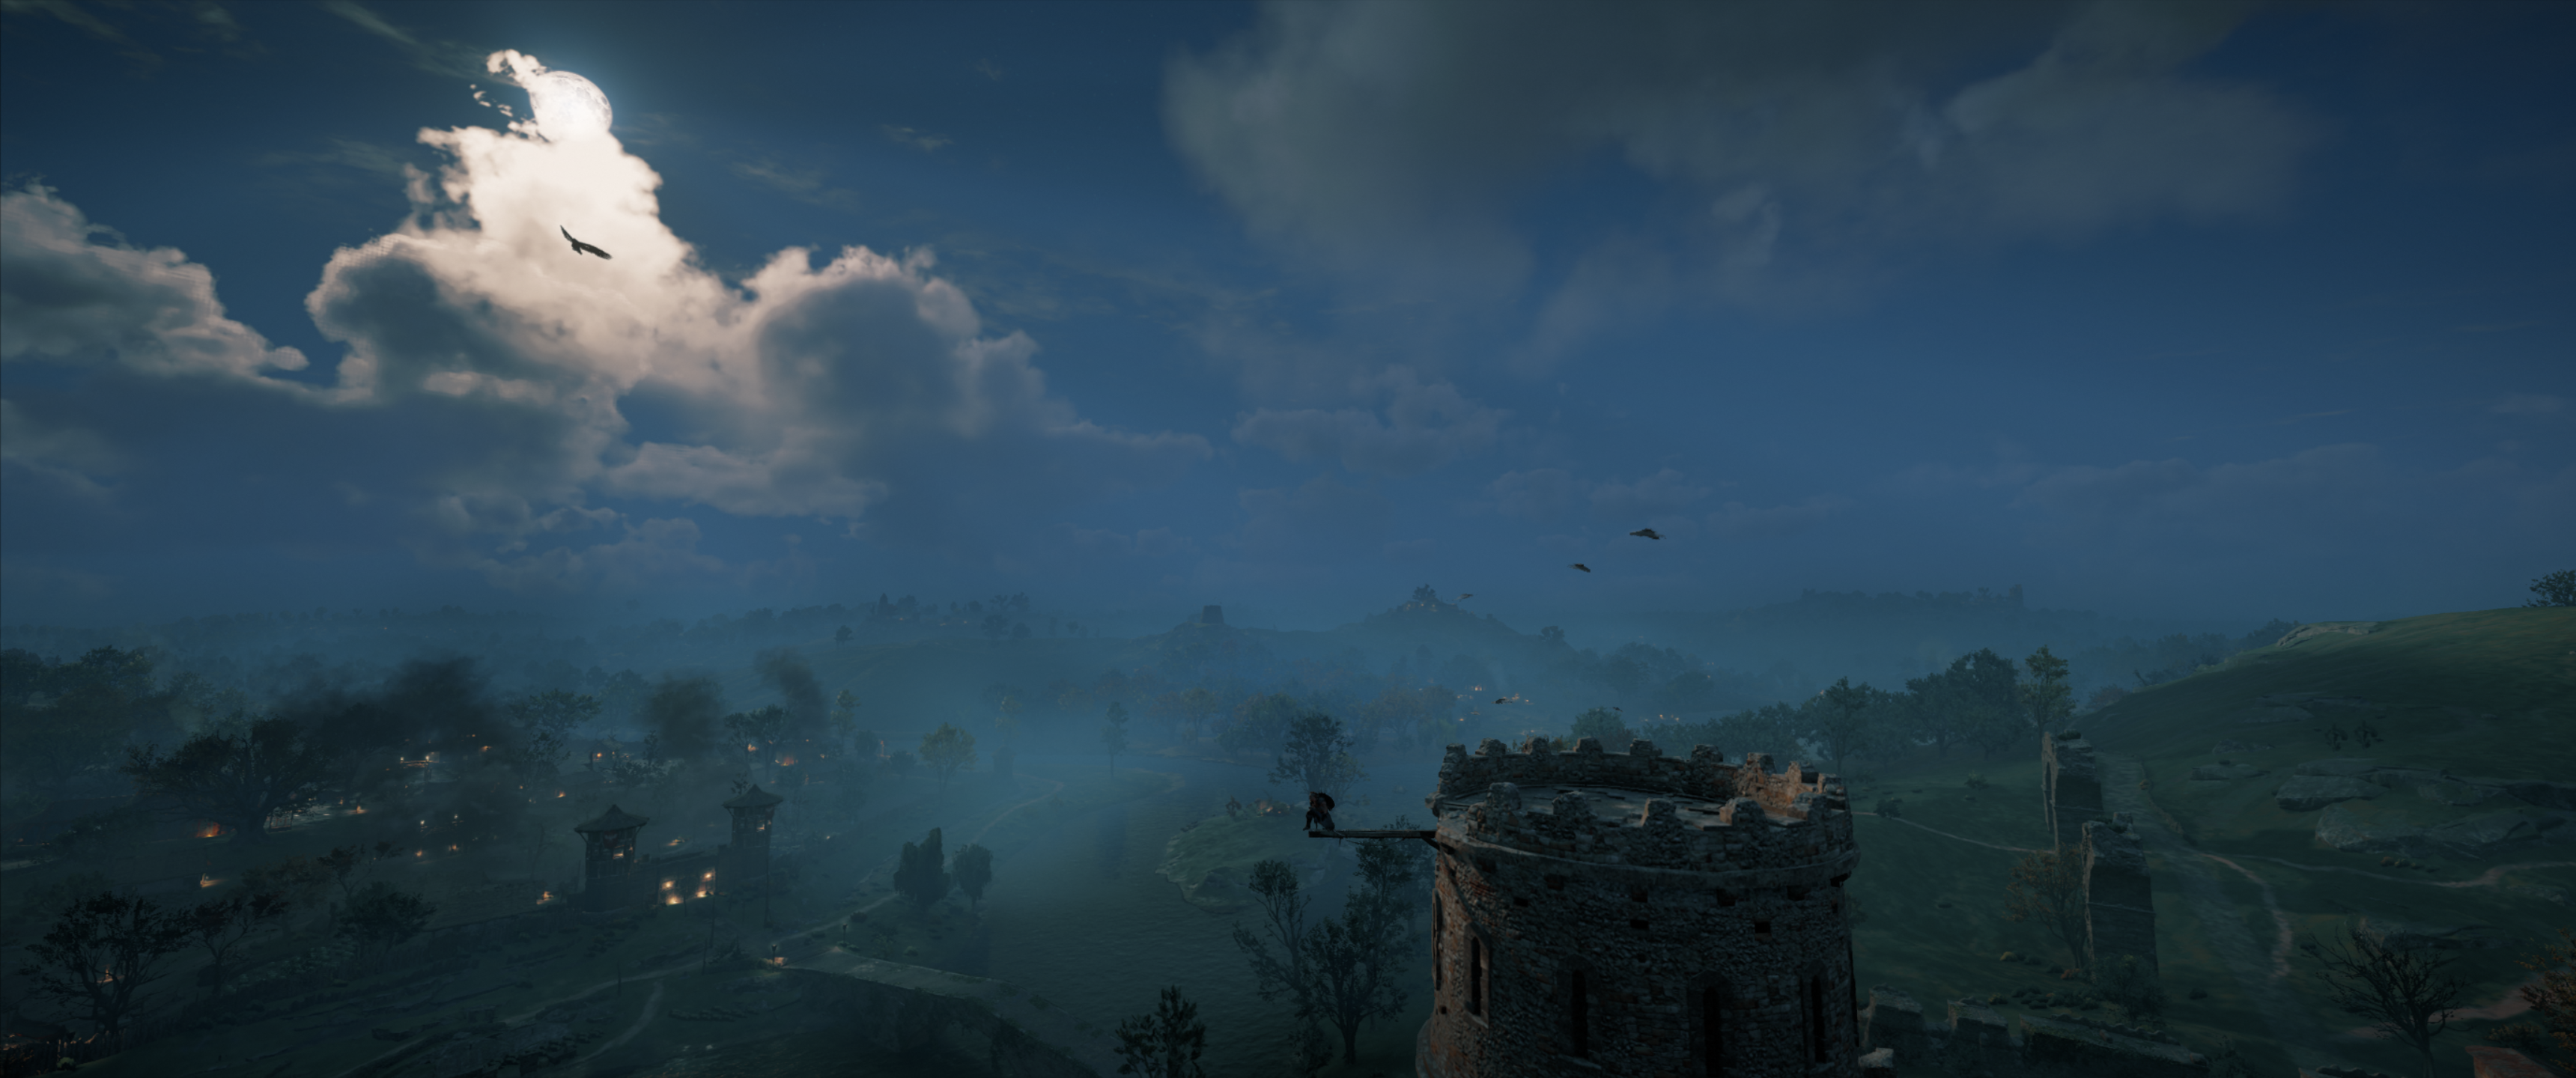 Assassins Creed Assassins Creed Valhalla Landscape Clouds Sun Structure Blue Trees Flag Green Yellow 3440x1440